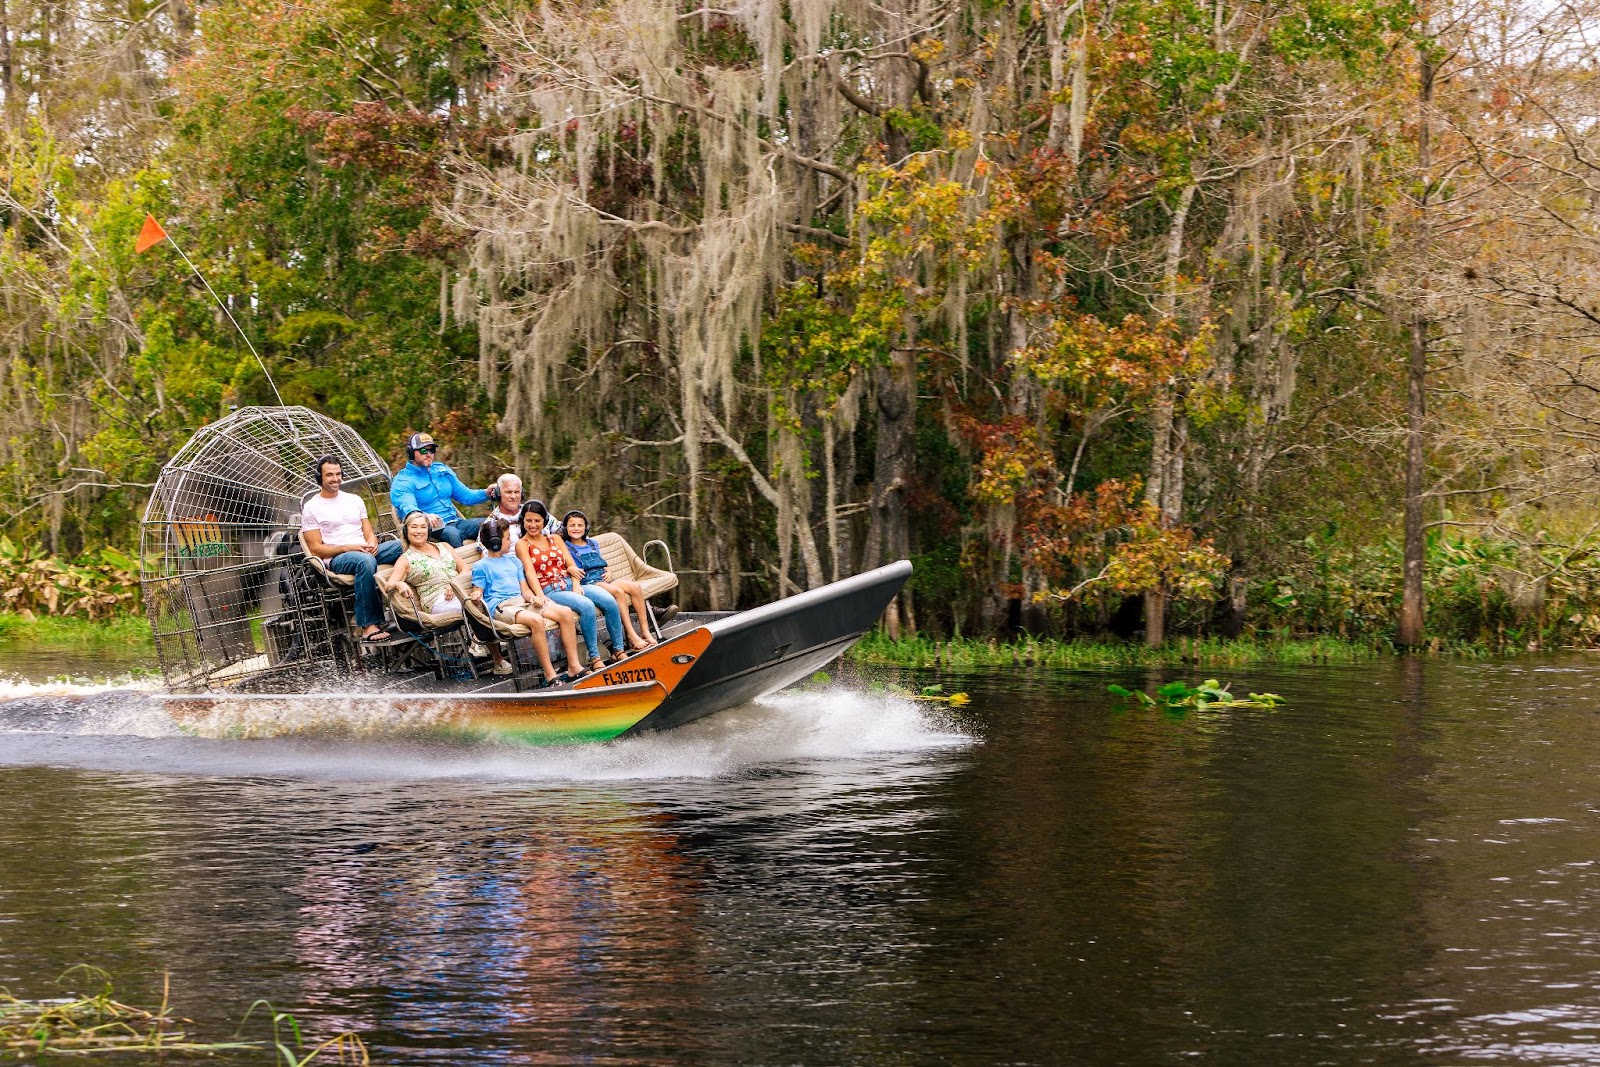 A family rides on an airboat tour through the Everglades in Wild Florida